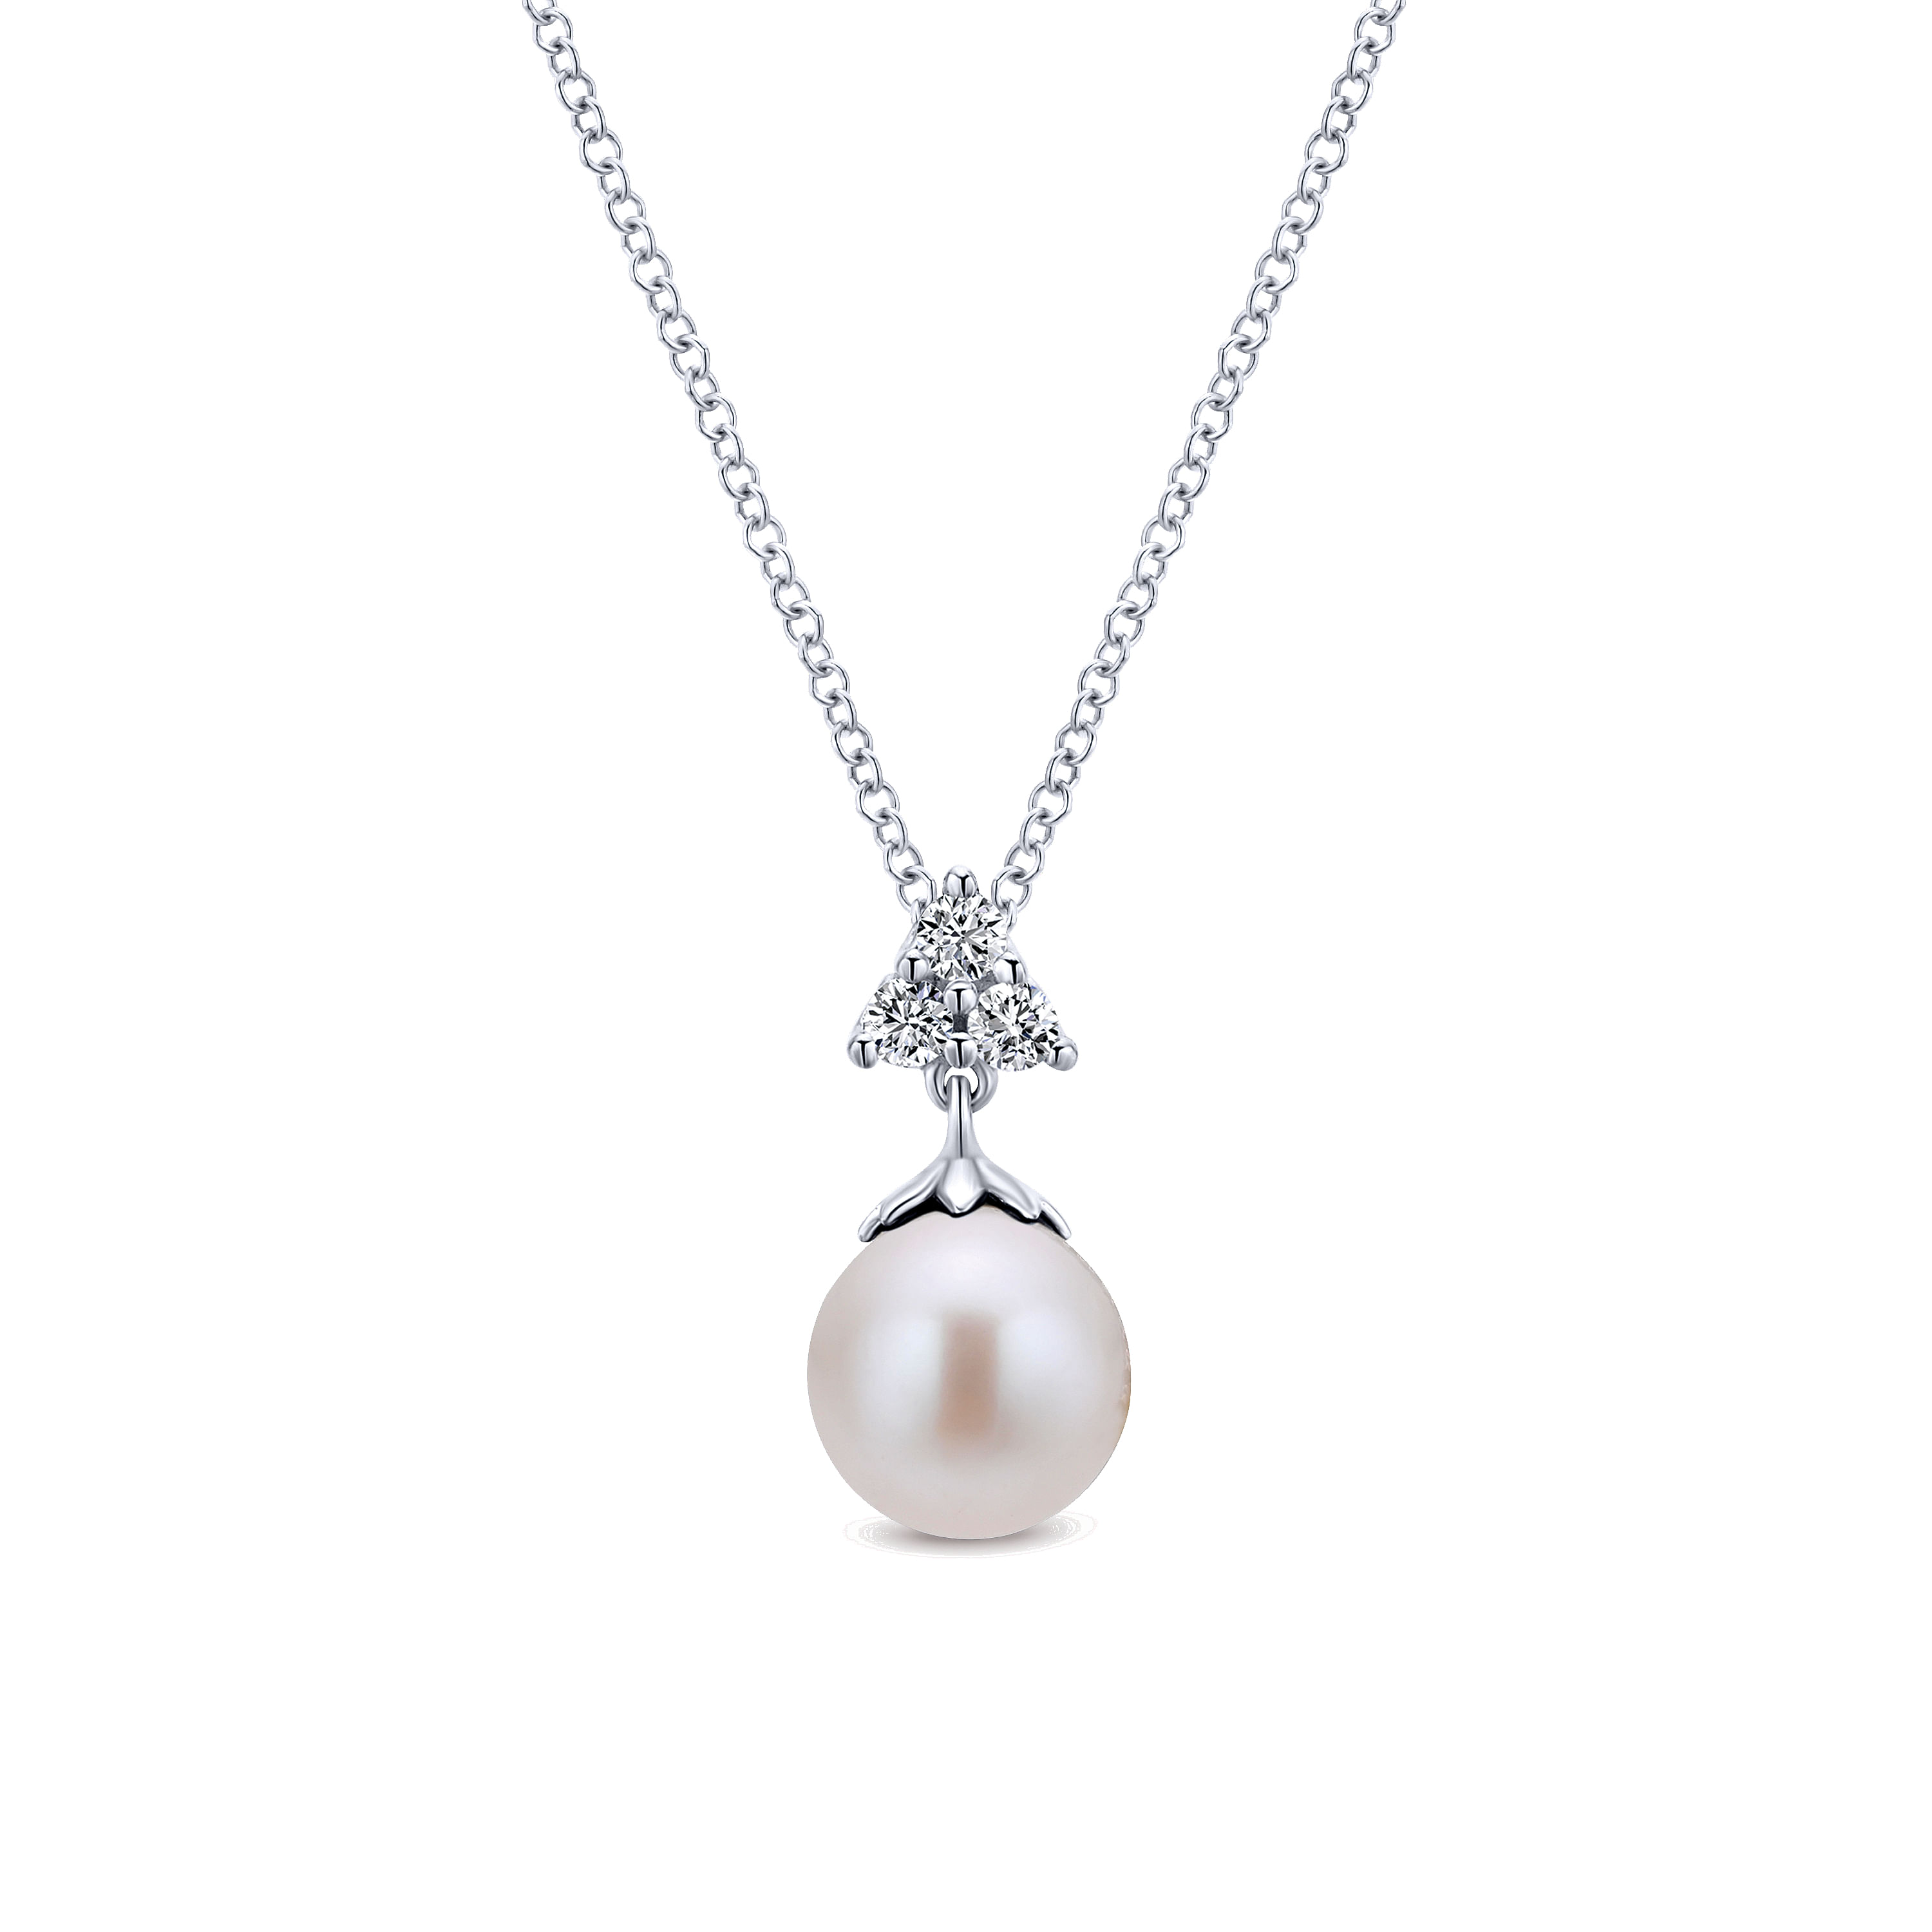 14K-White-Gold-Cultured-Pearl-Drop-Necklace-with-Diamond-Accent1